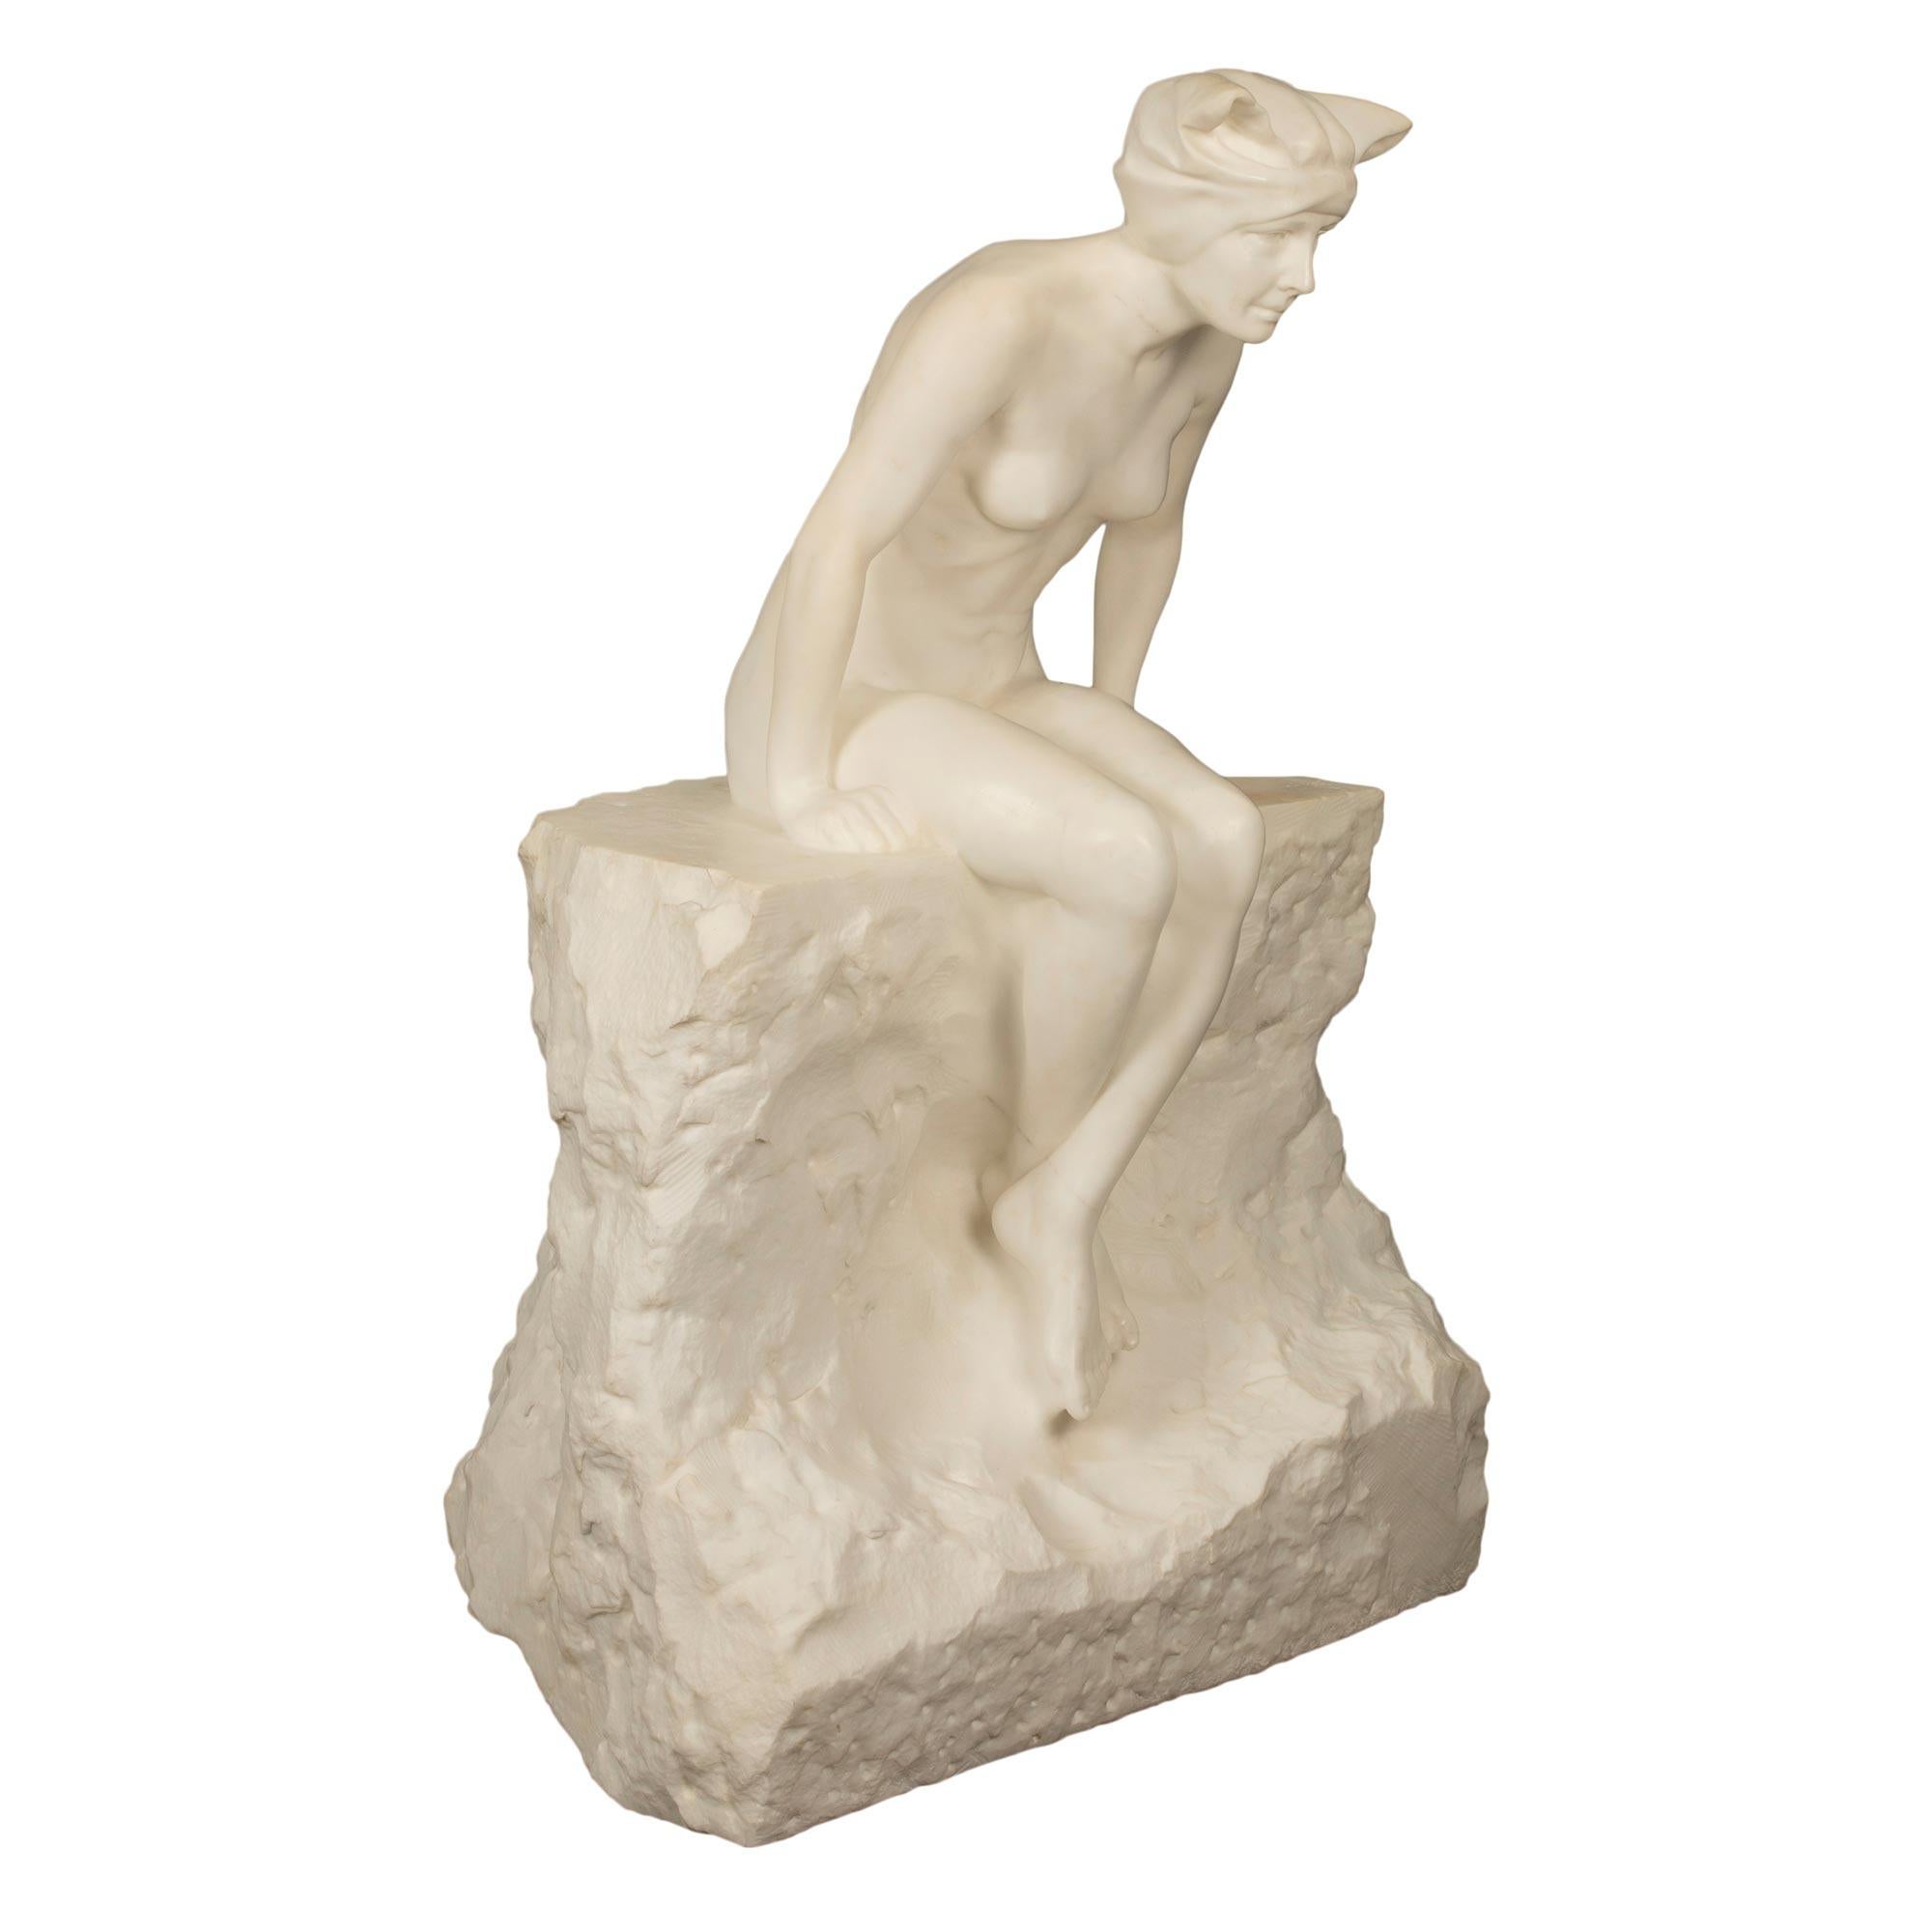 A striking Italian 19th century white Carrara marble statue of a maiden sitting on a rock. The statue is raised by a most impressive and large scale square rock designed base. The beautiful nude maiden wears a bathing bonnet and is seated on a rock,